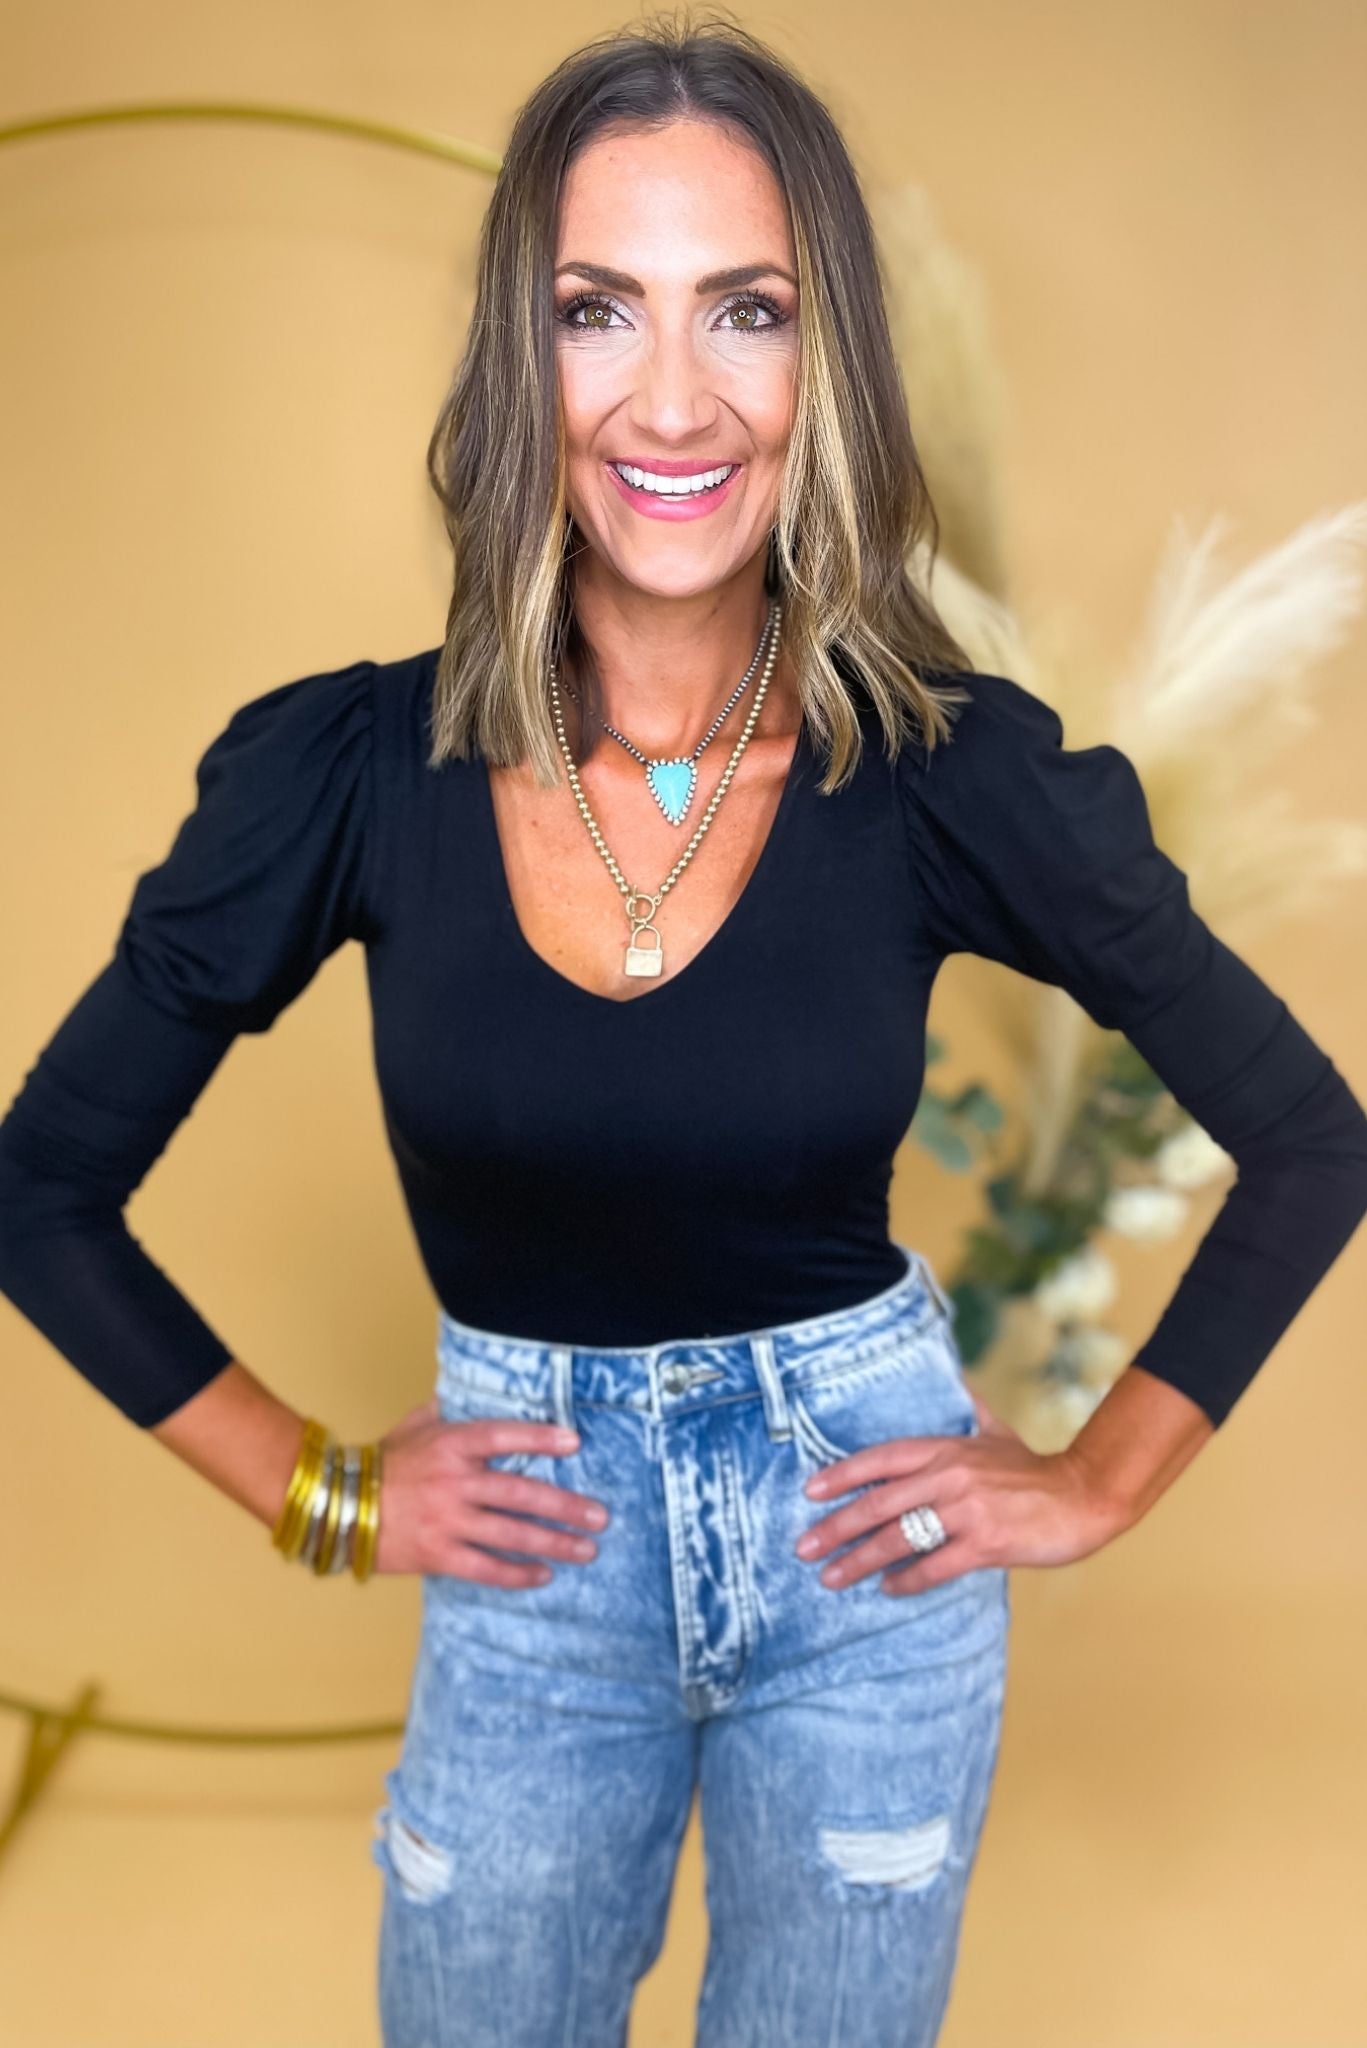 Load image into Gallery viewer, black puff shoulder knit top, acid wash boyfriend jeans, date night outfits, affordable style, shop style your senses by mallory fitzsimmons
